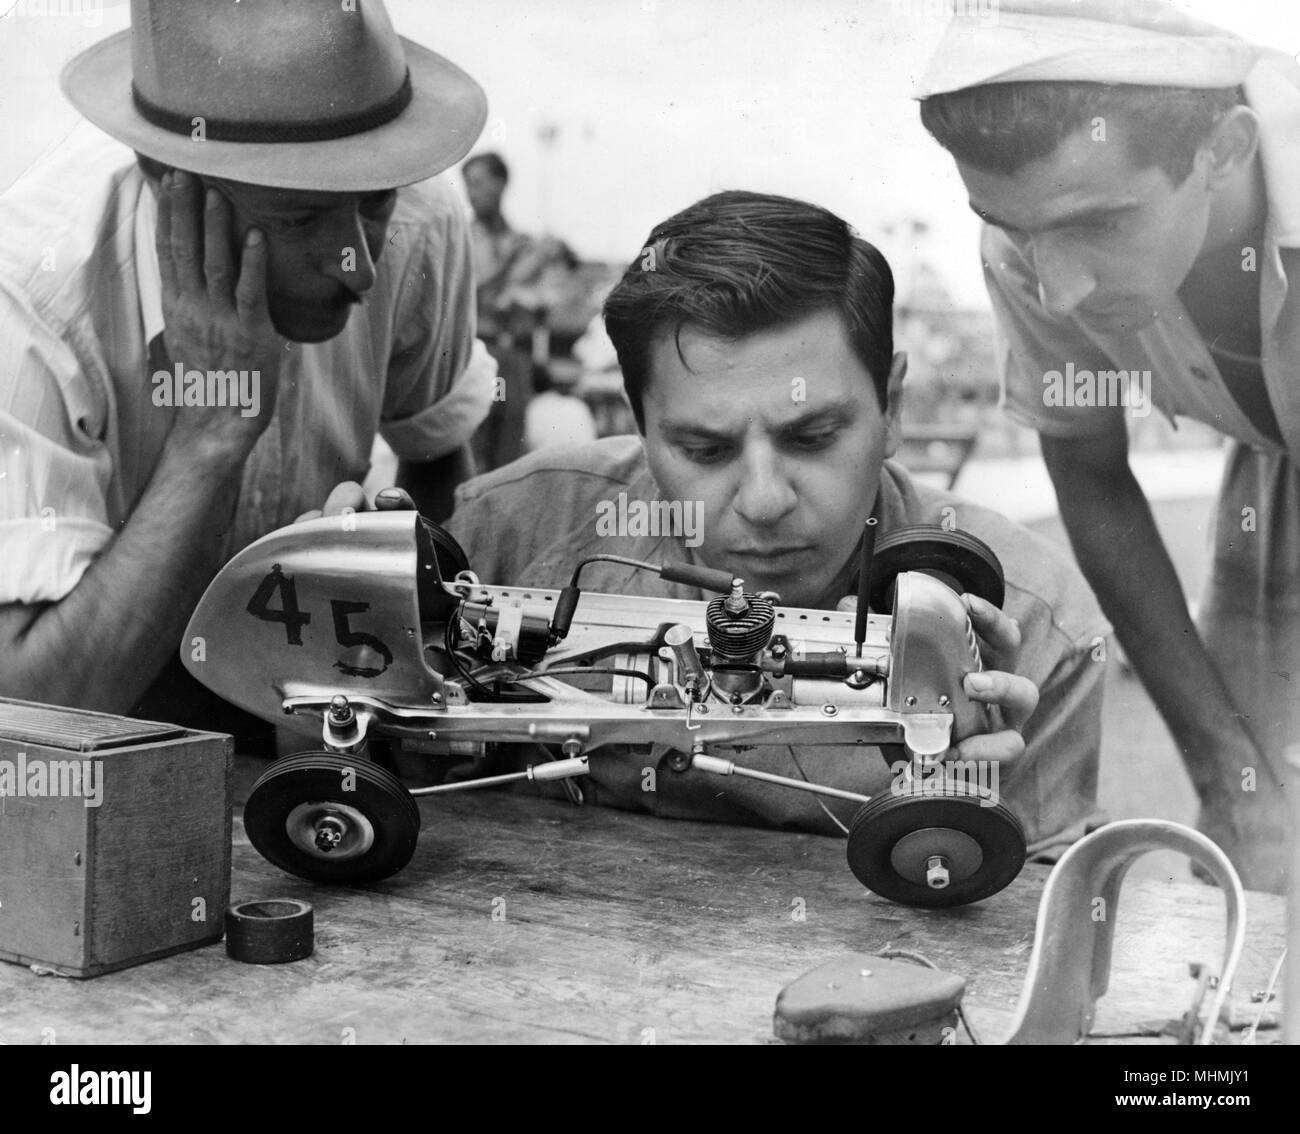 Three men examine a model racing car before the start of the big race       Date: 1950s Stock Photo